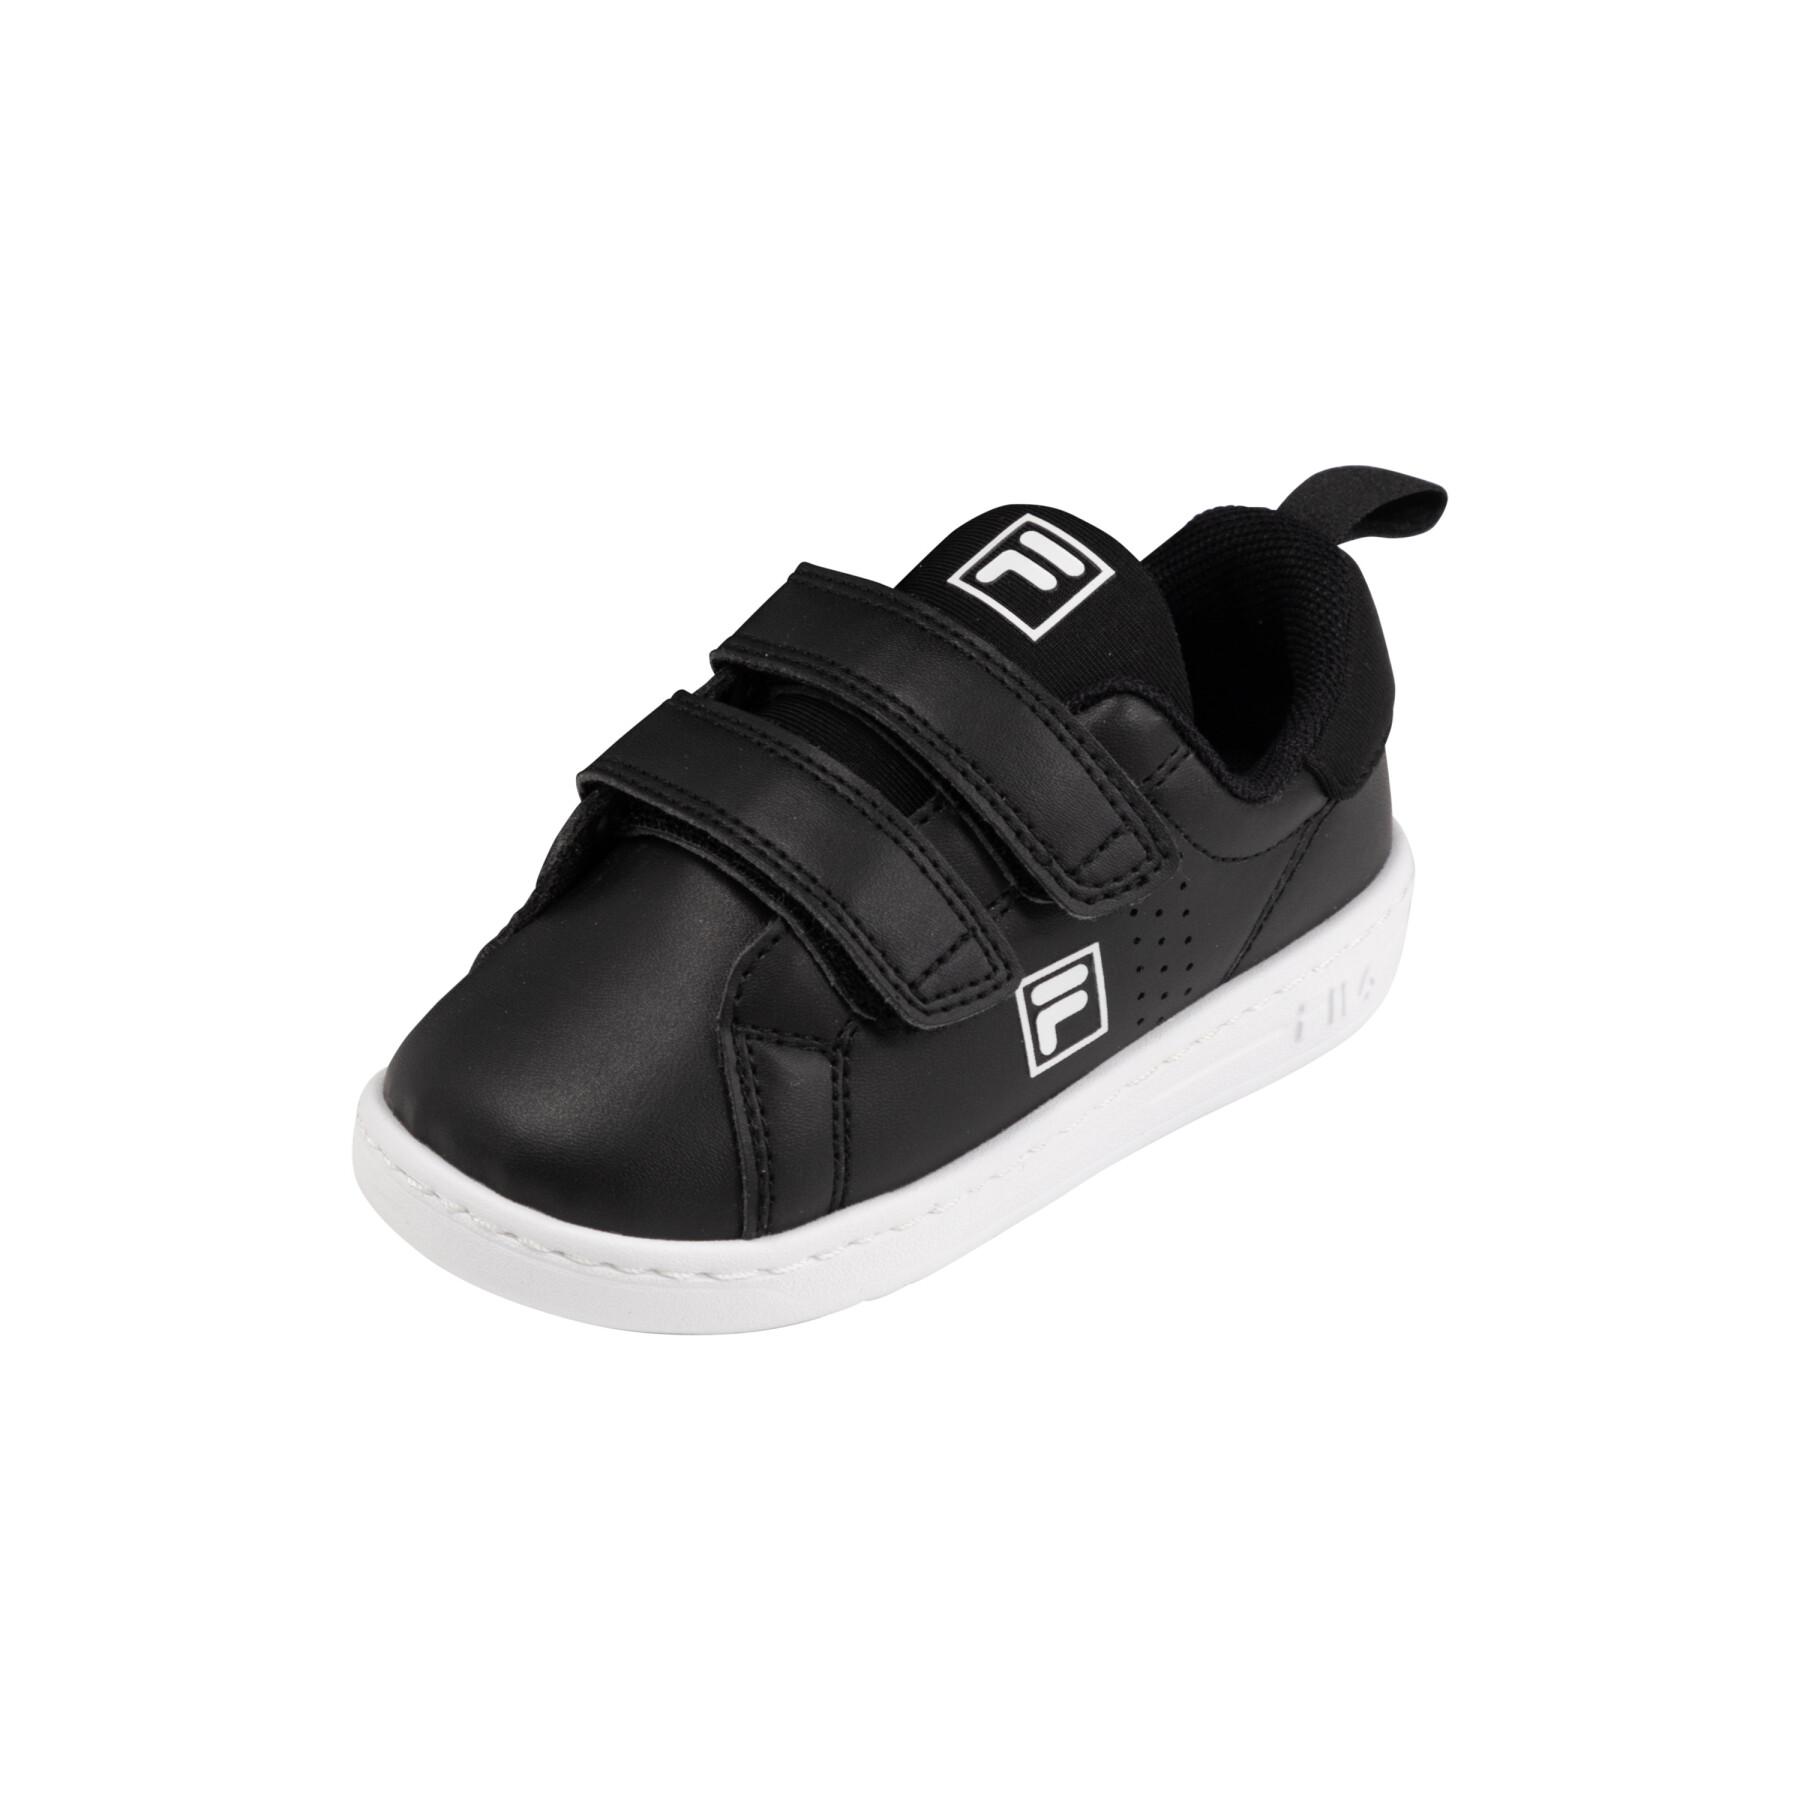 Velcro baby sneakers Fila Crosscourt Shoes - Baby Baby A Baby - 2 Sneakers - NT